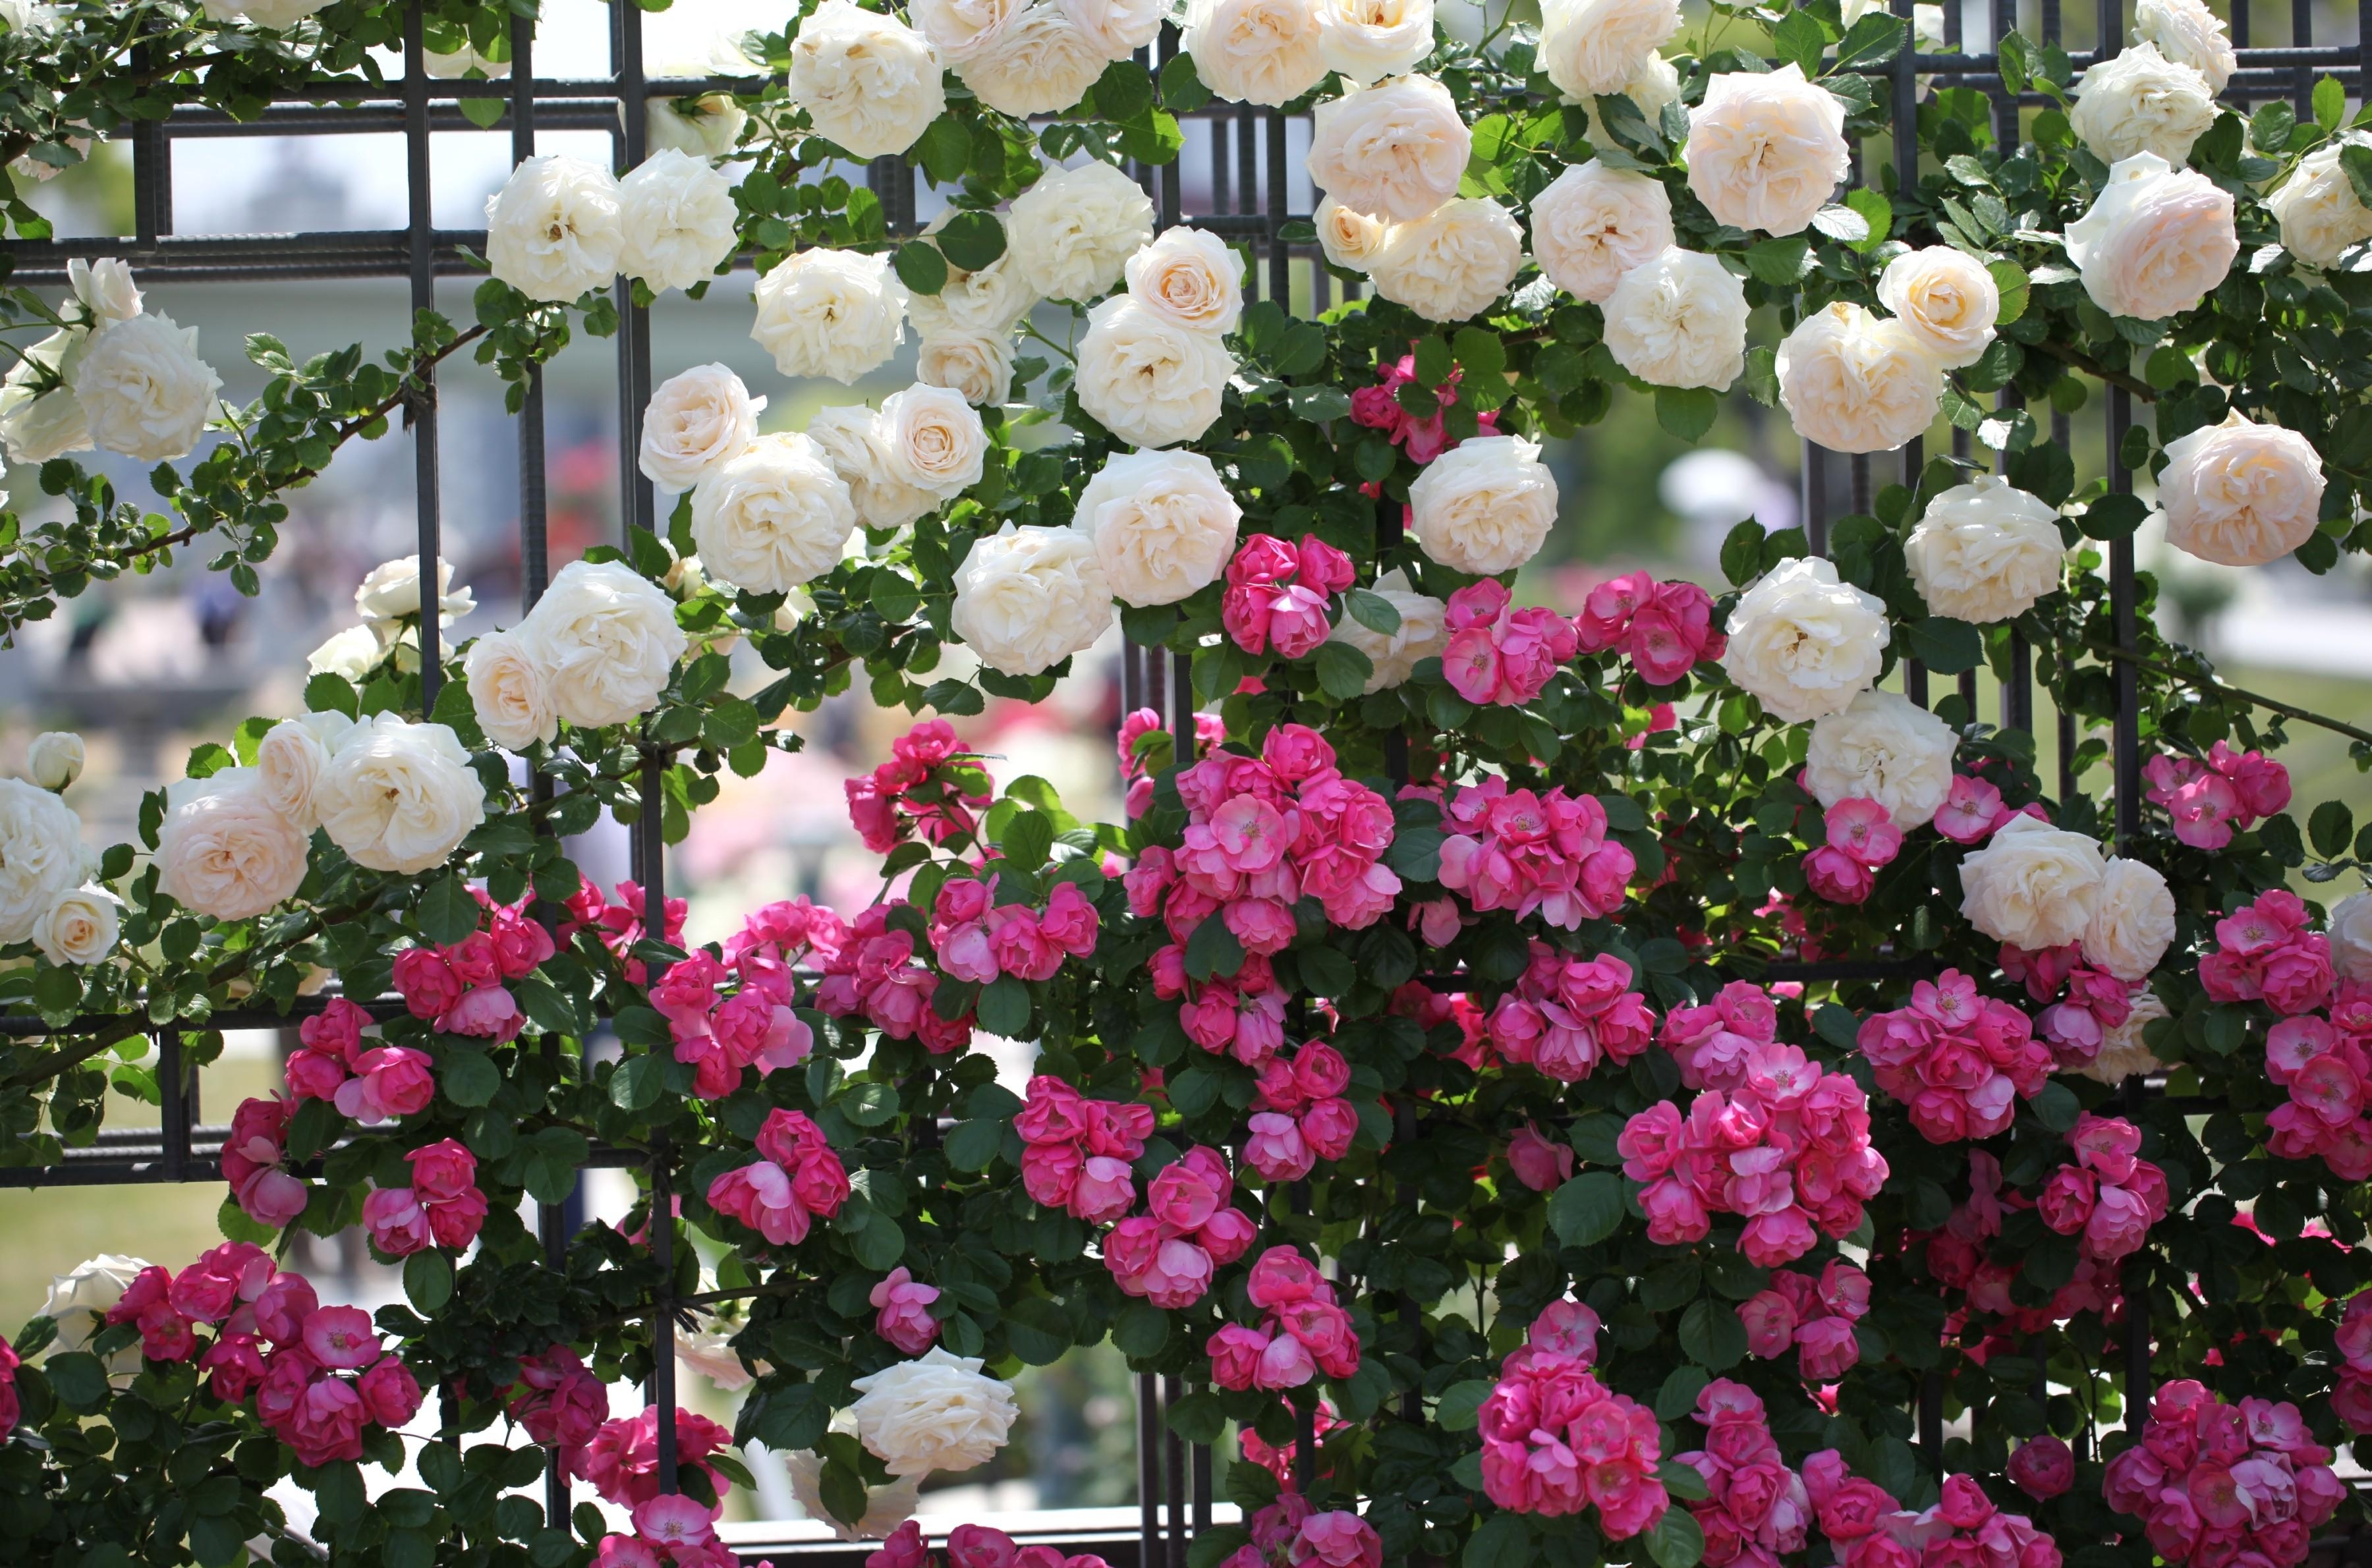 it's beautiful, roses, flowers, greens, fence, handsomely, different 32K